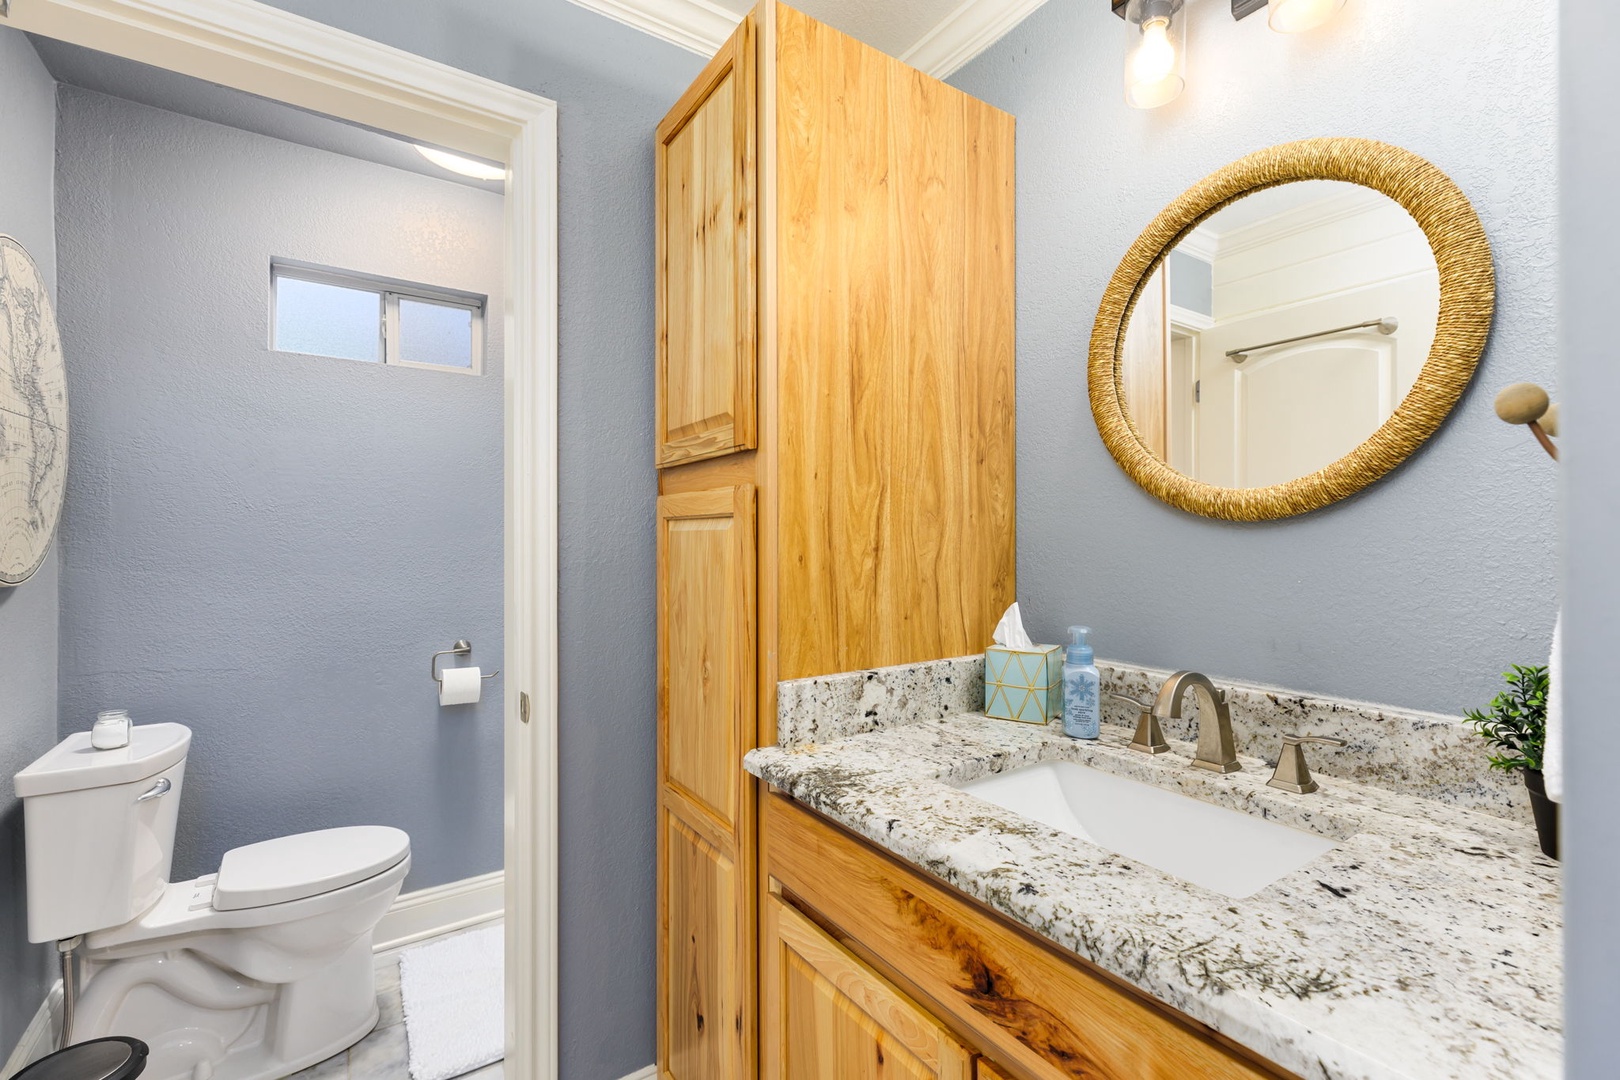 The cabin’s full bathroom features a vanity with storage & shower